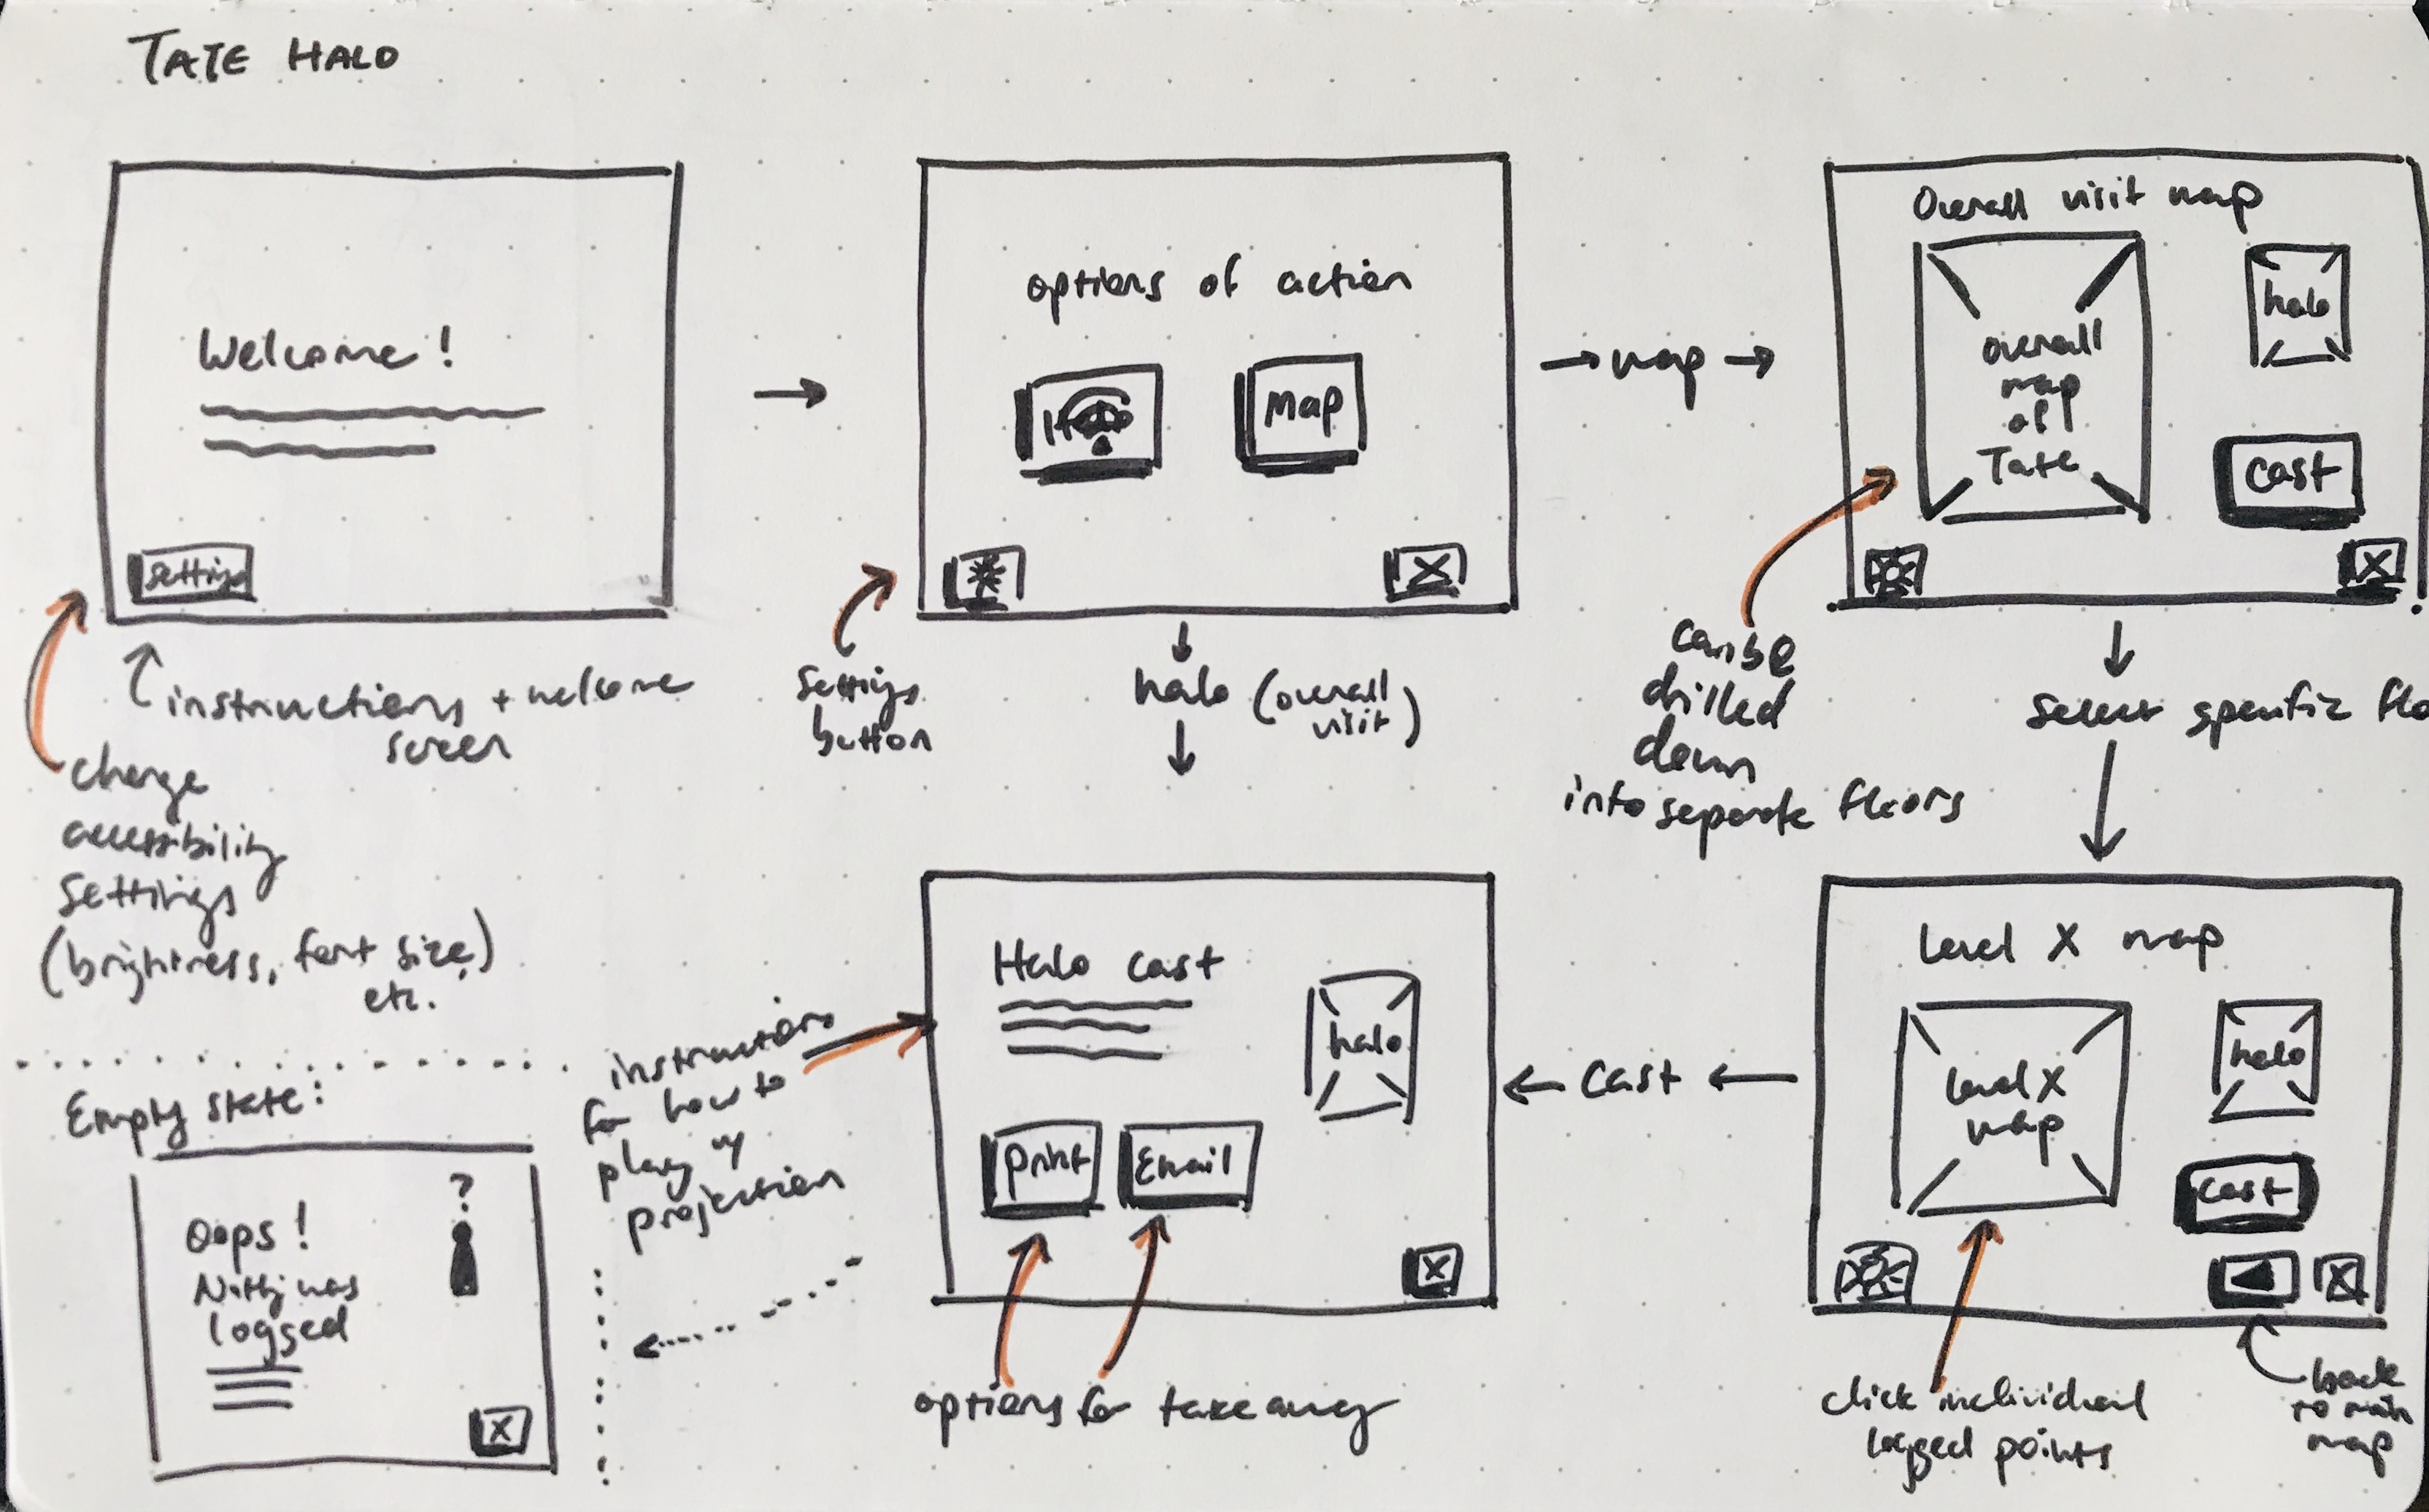 Lo-fi wireframes of the kiosk showing the user flow